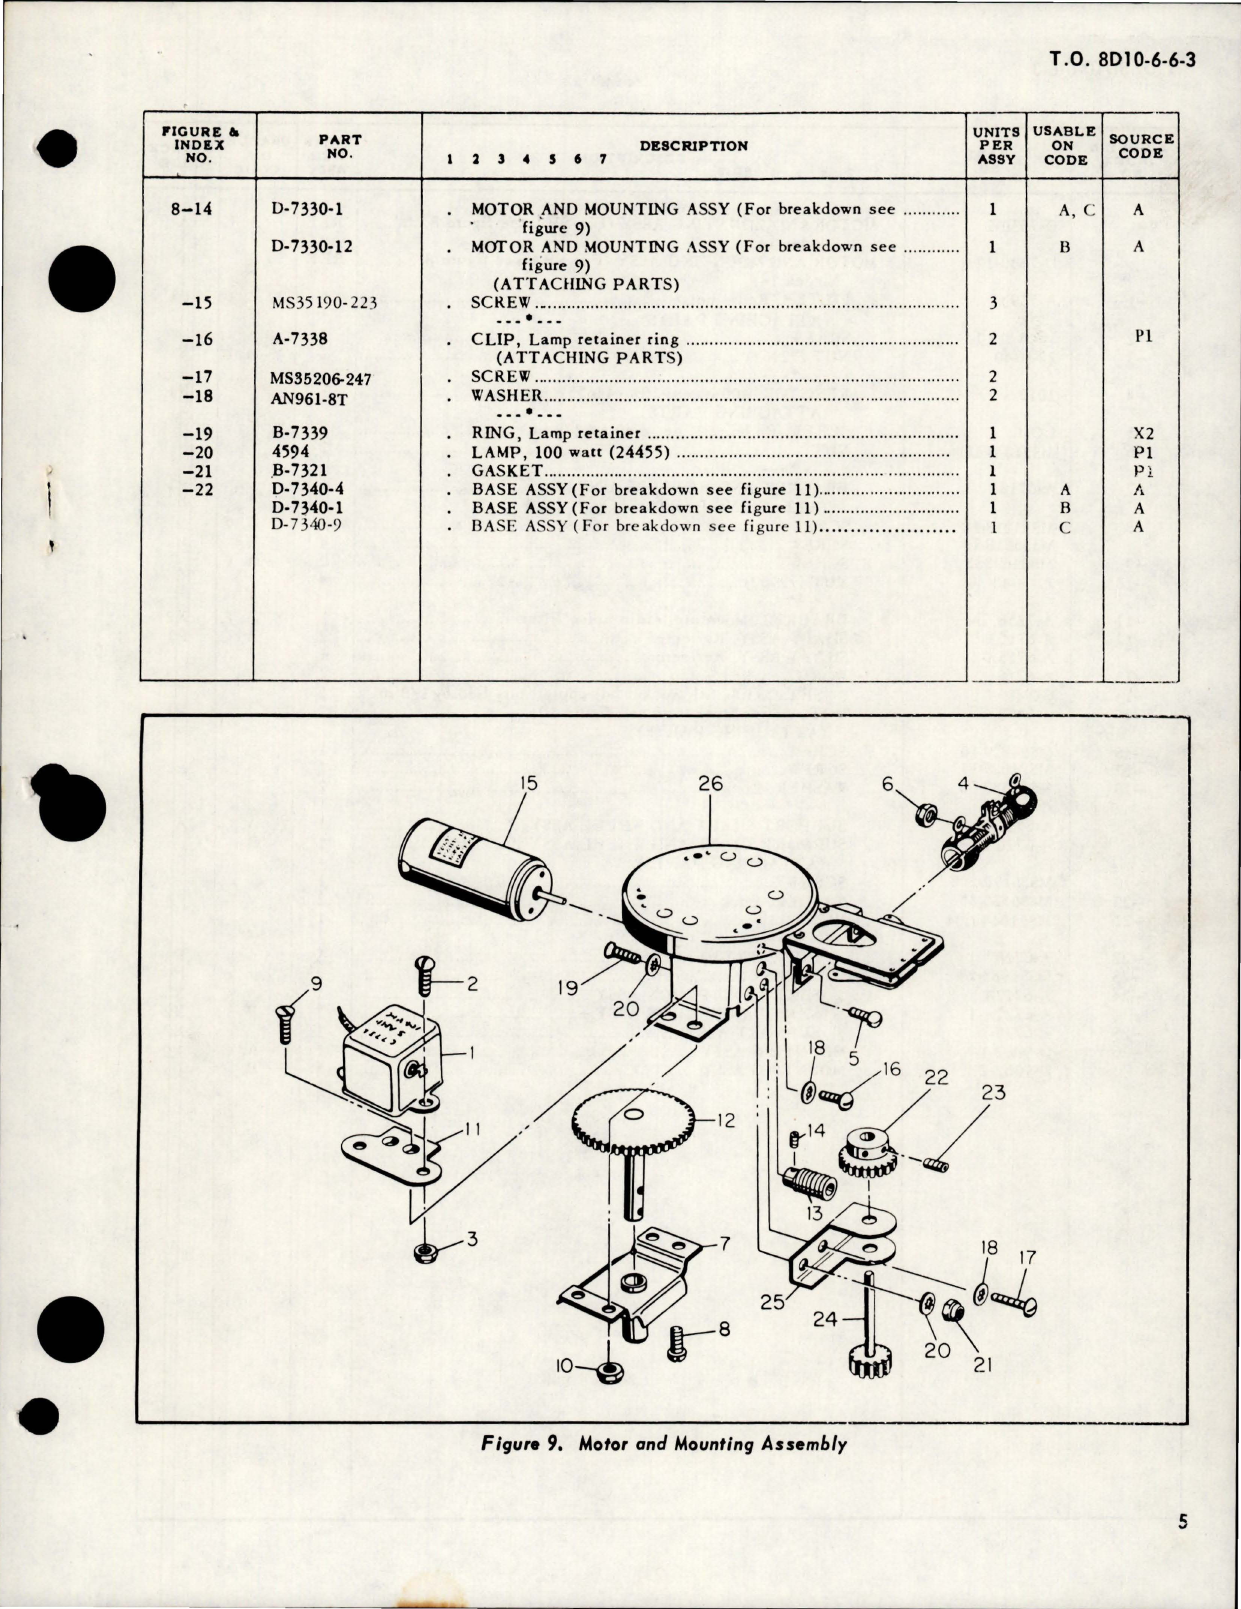 Sample page 7 from AirCorps Library document: Overhaul with Parts Breakdown for Rotating Warning Navigational Light